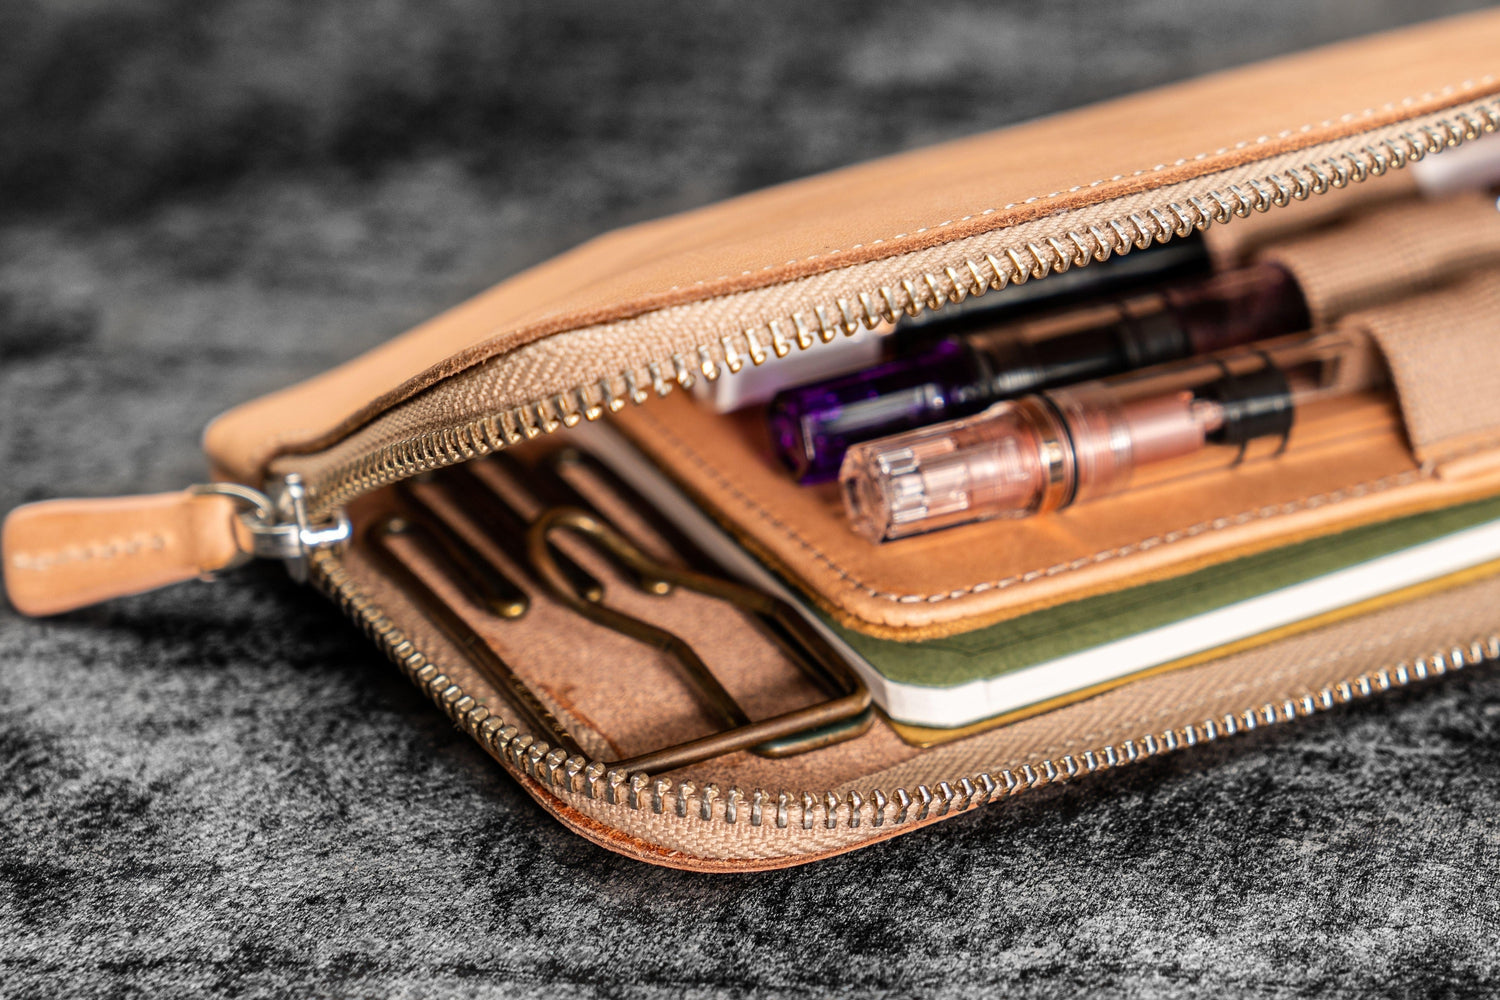 LIHITLAB Compact Pen Case, Water & Stain Repellent